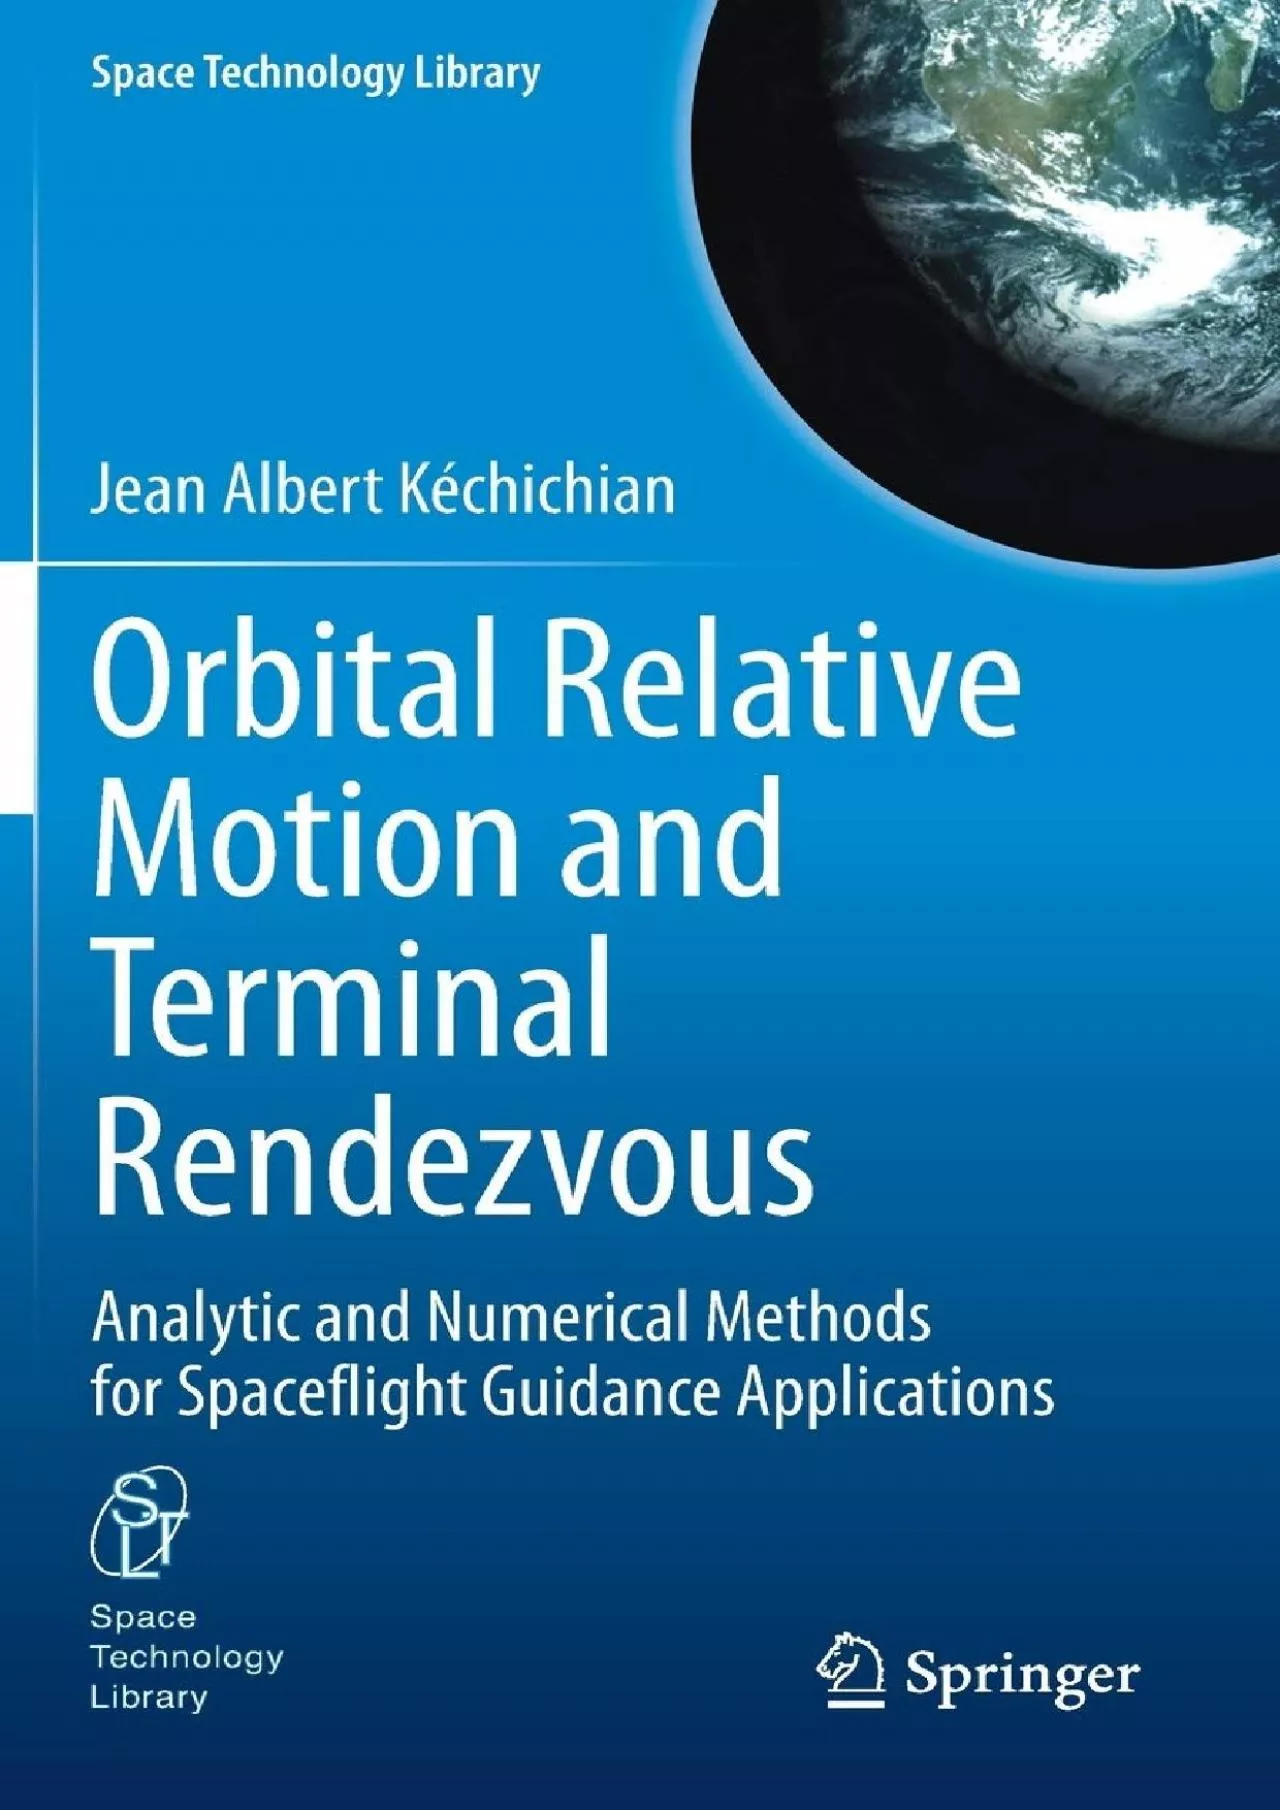 (EBOOK)-Orbital Relative Motion and Terminal Rendezvous: Analytic and Numerical Methods